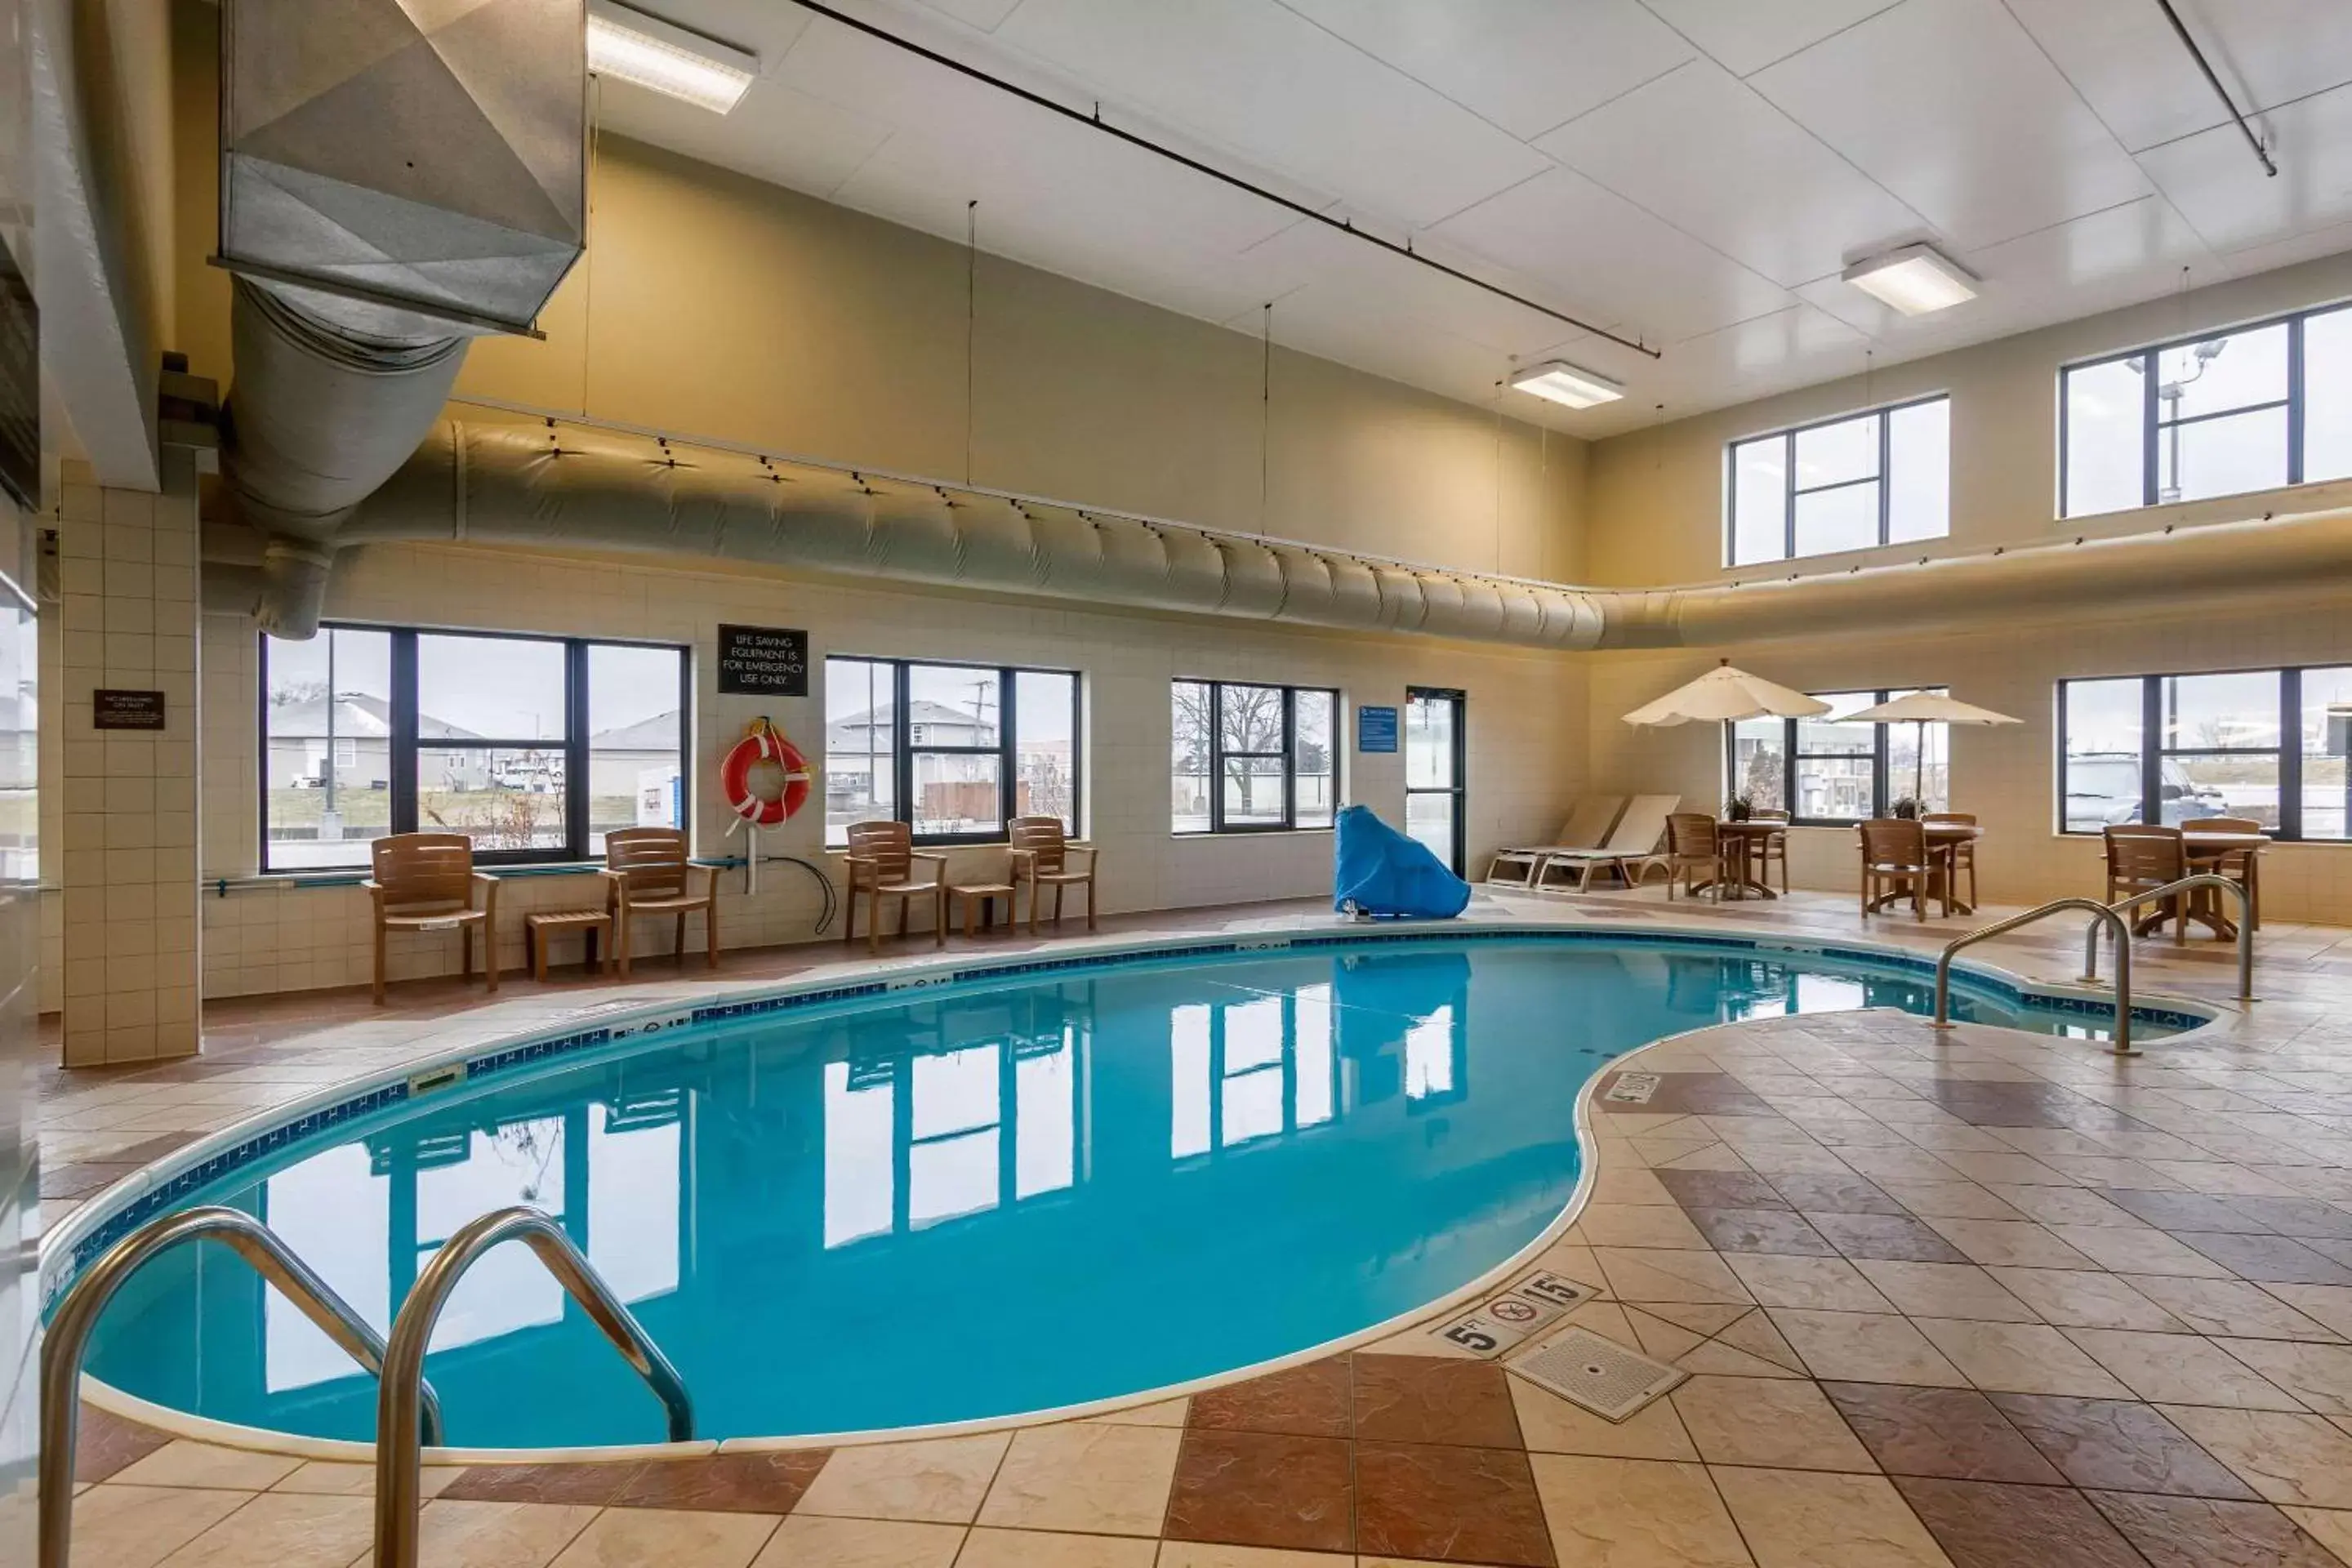 On site, Swimming Pool in Comfort Inn & Suites Springfield I-44